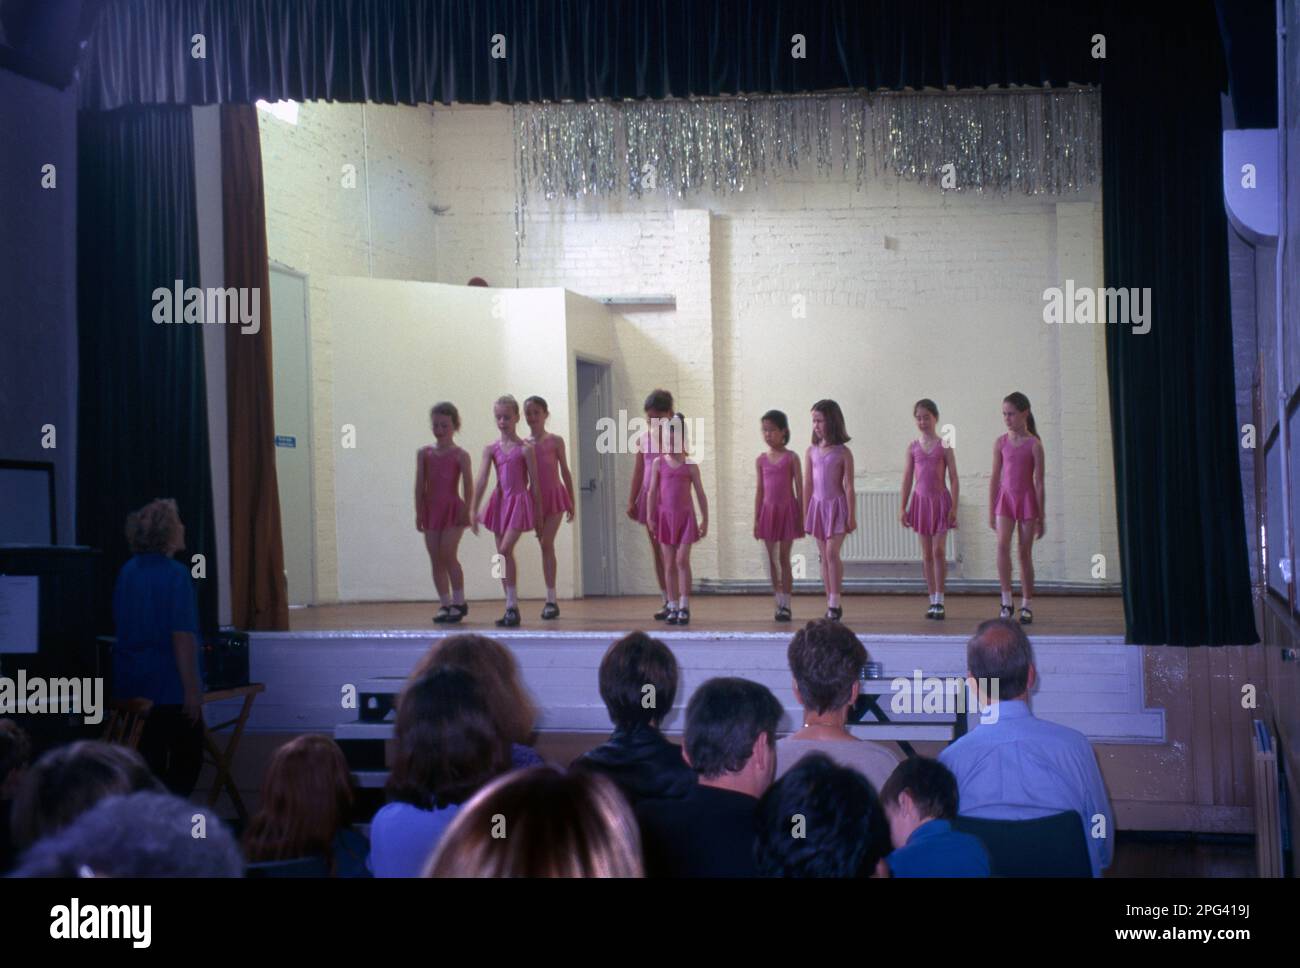 Audience watching Children's Tap Dancing Performance on Stage Surrey England Stock Photo